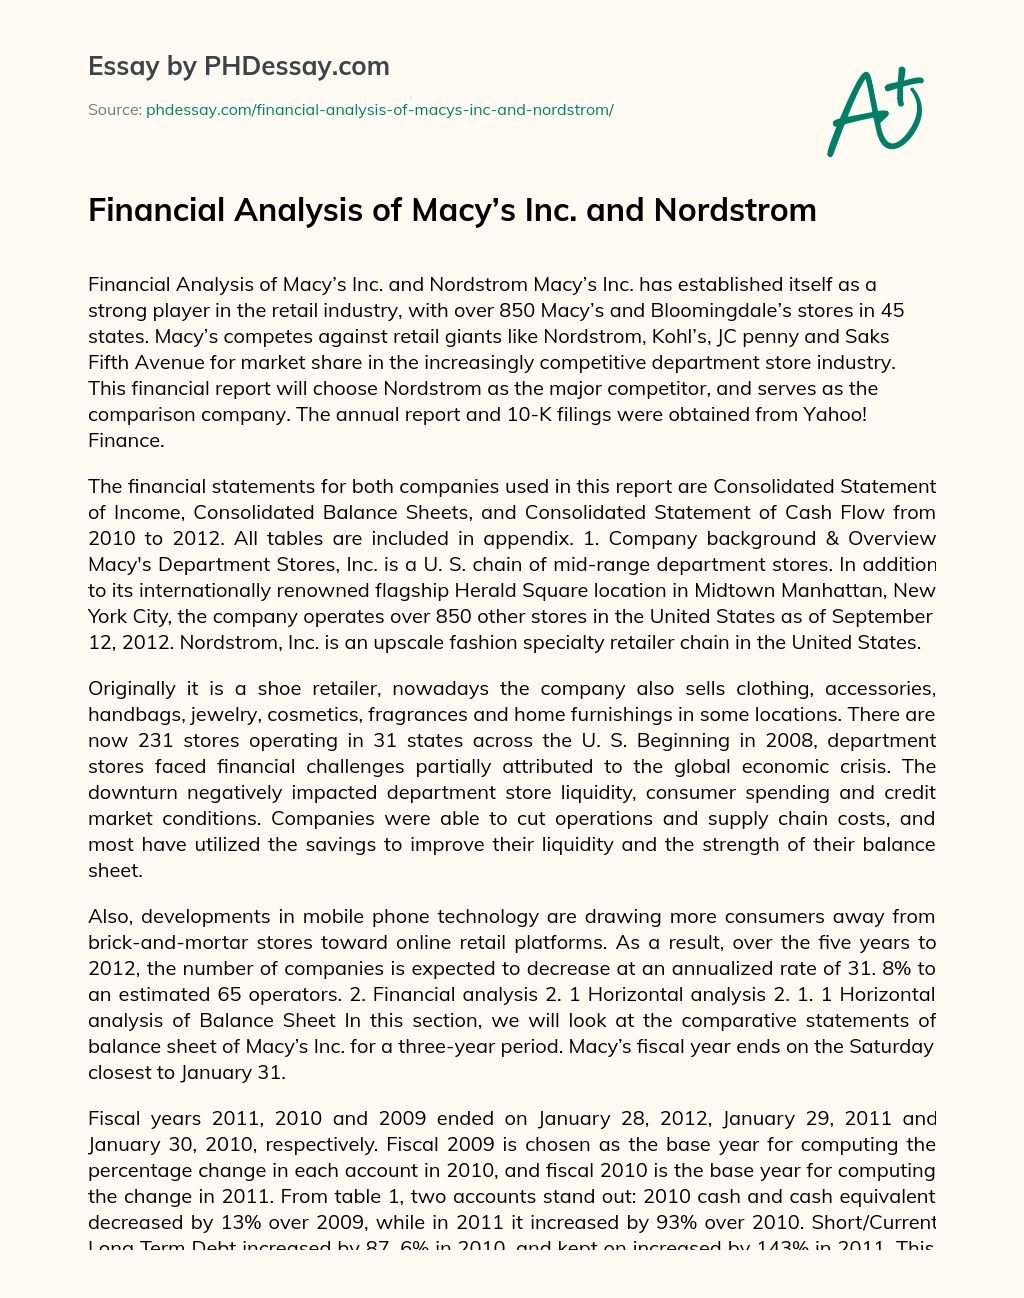 Financial Analysis of Macy’s Inc. and Nordstrom essay